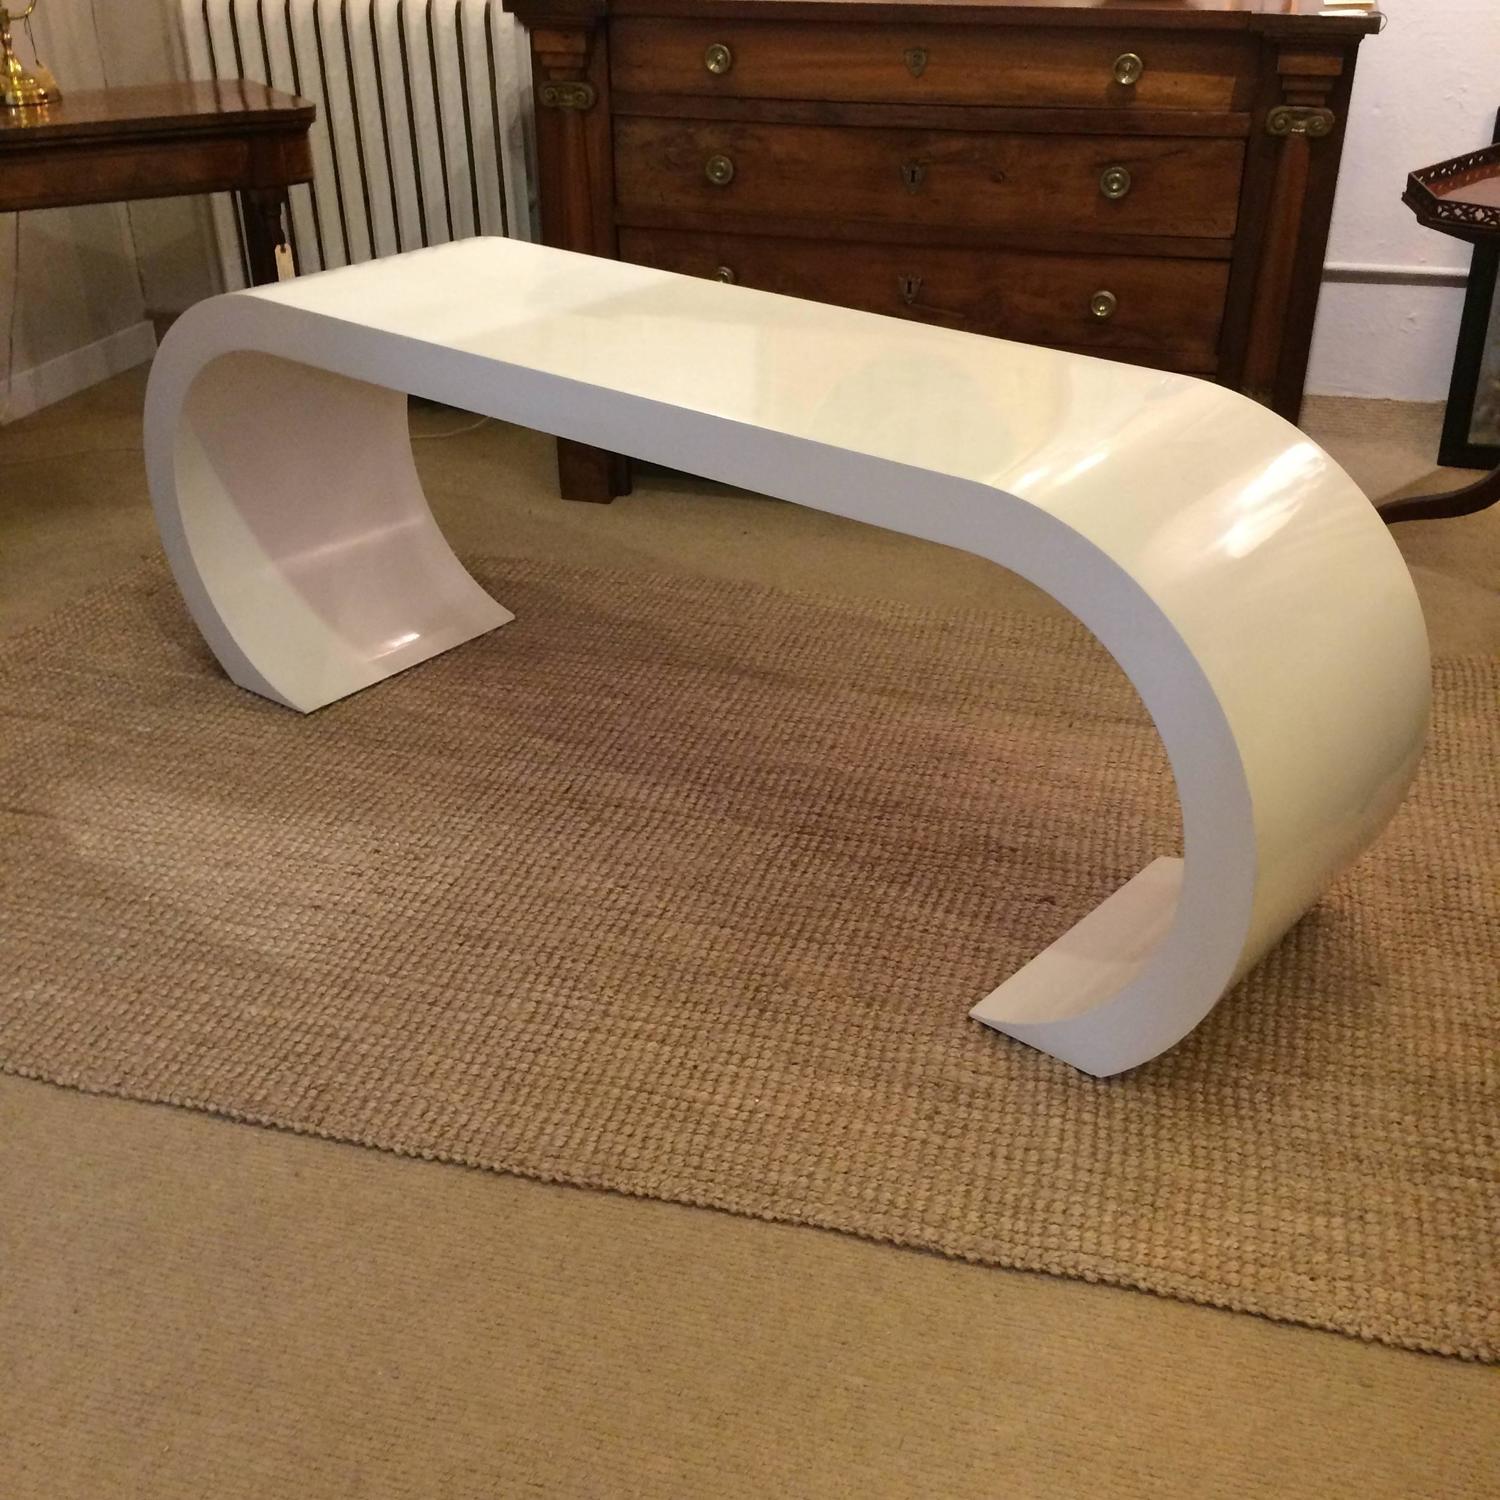 Sleek MidCentury Modern White Lacquer Waterfall Console Table at 1stdibs